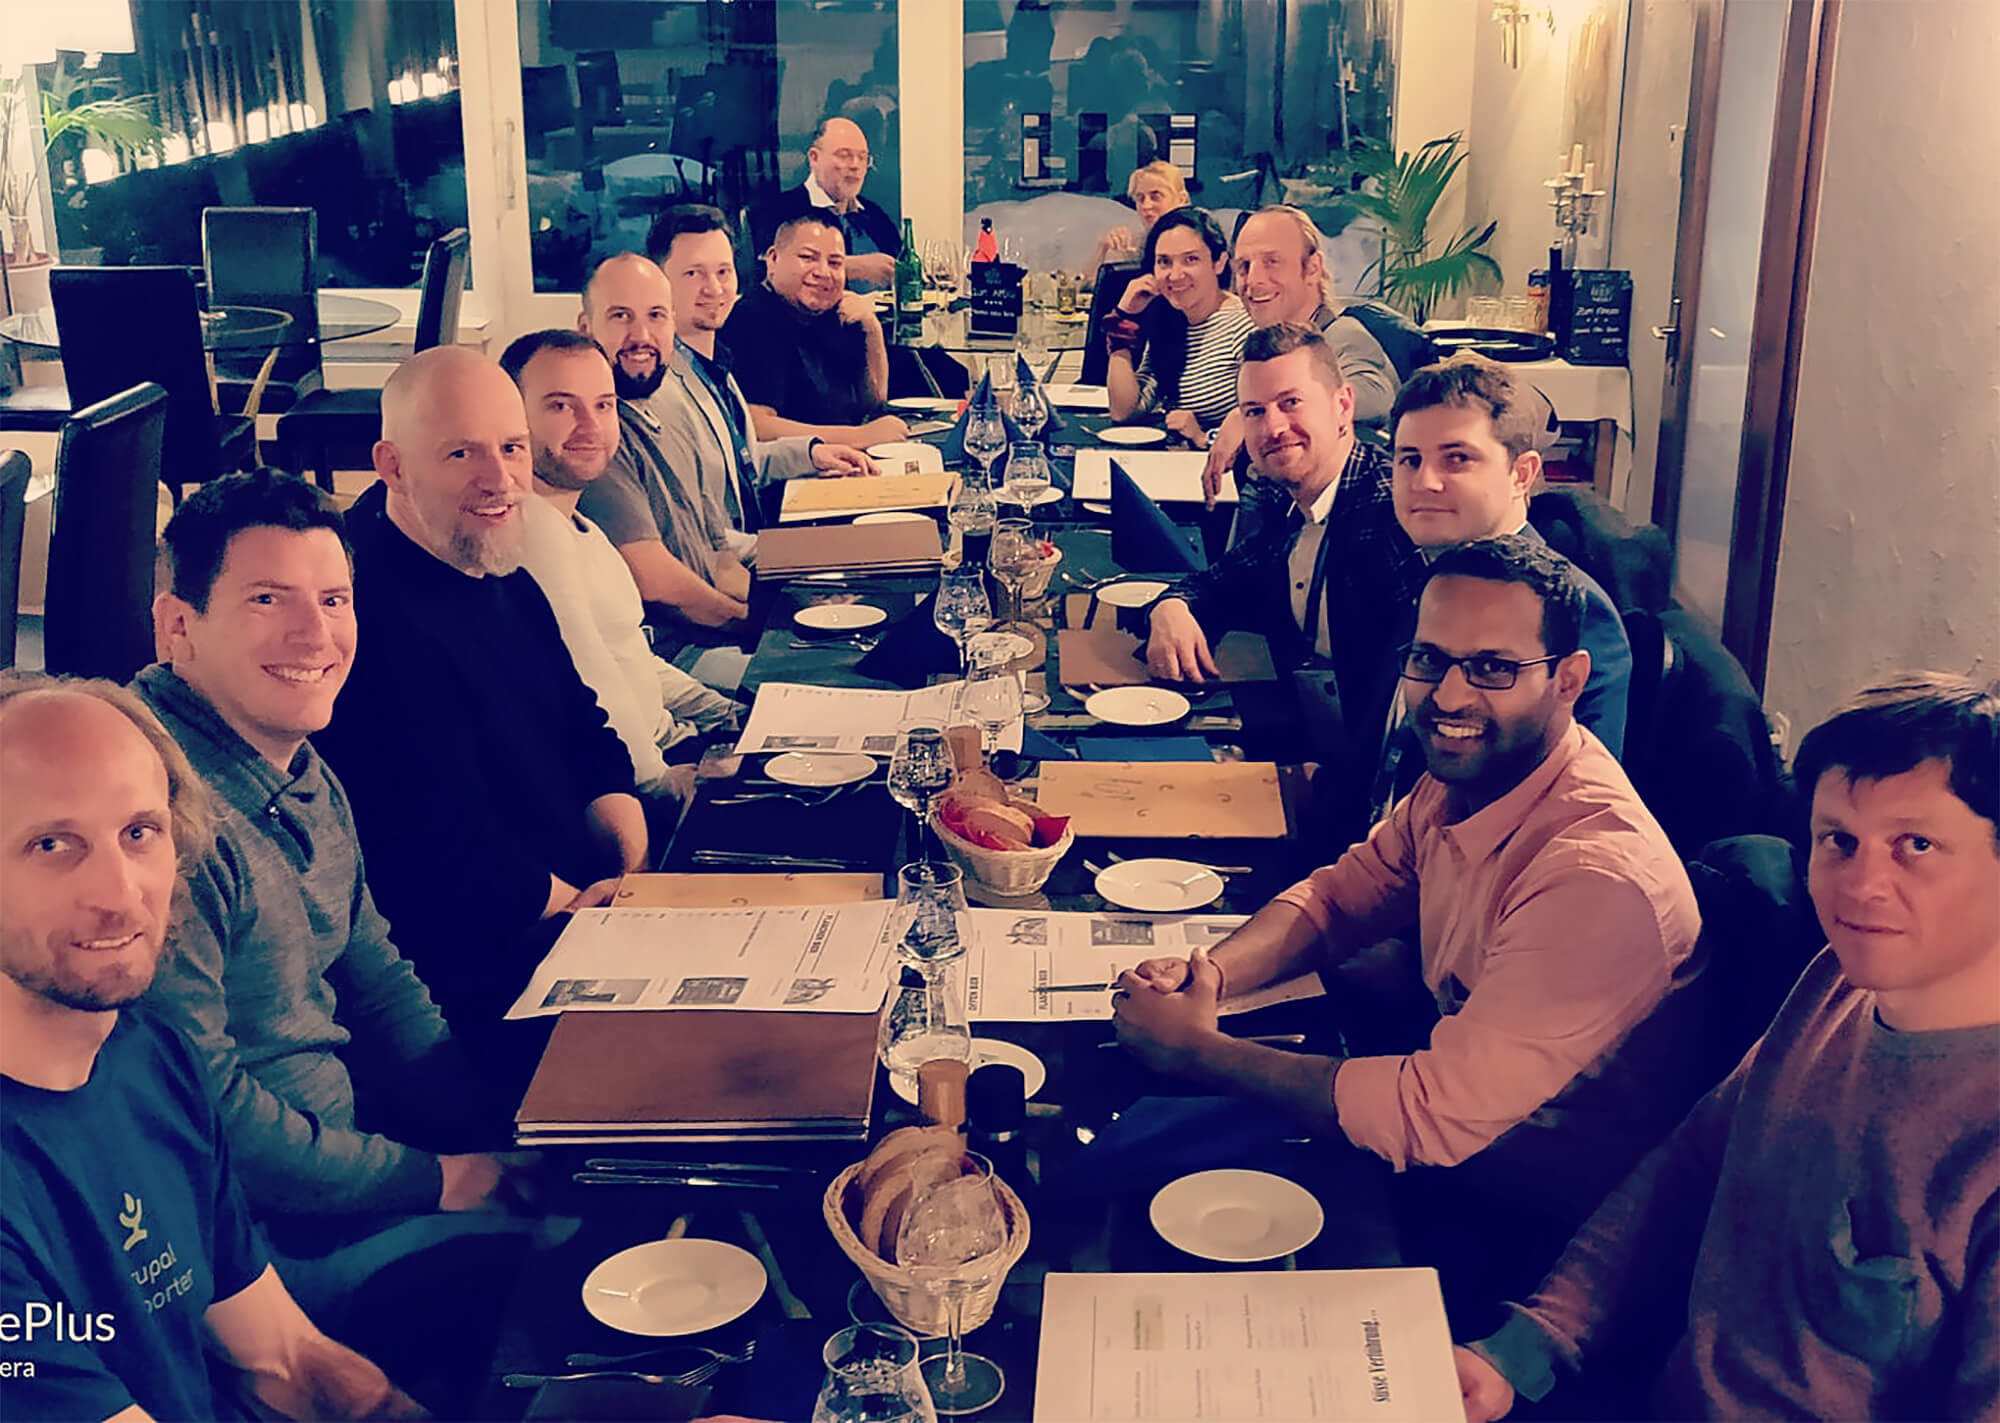 Diner at Davos during the Drupal camp 2019 in Switzerland